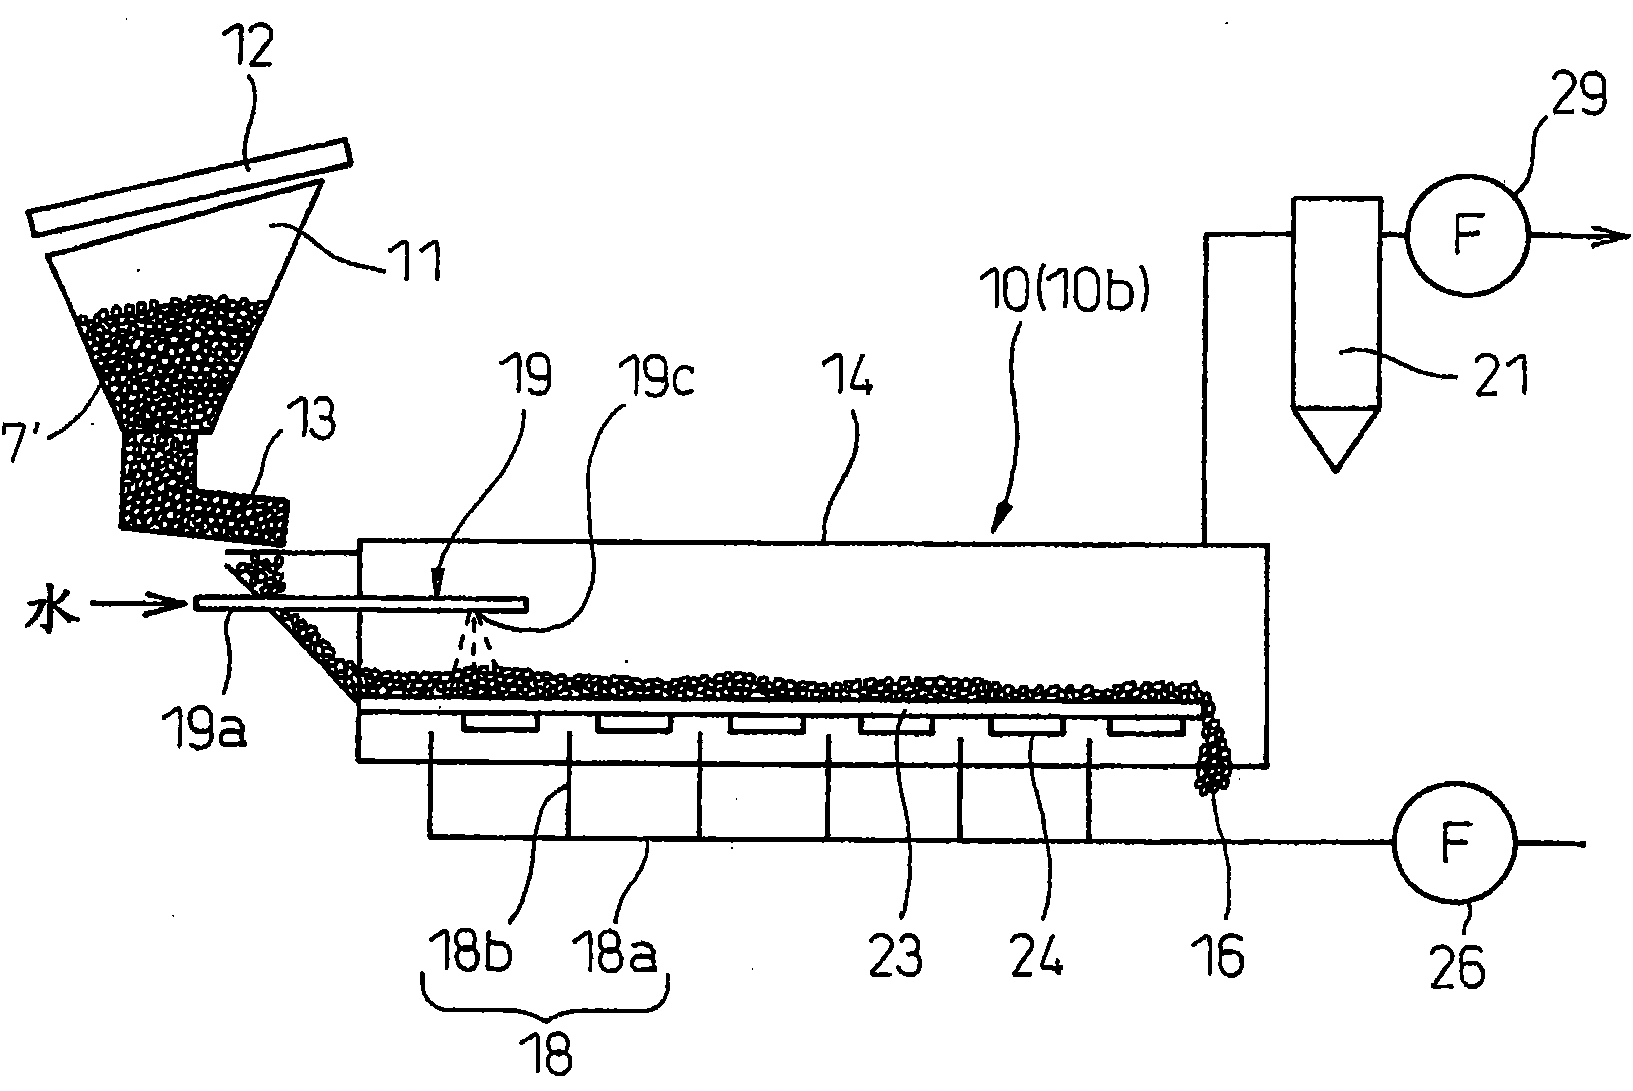 Method and apparatus for treating high-temperature slag